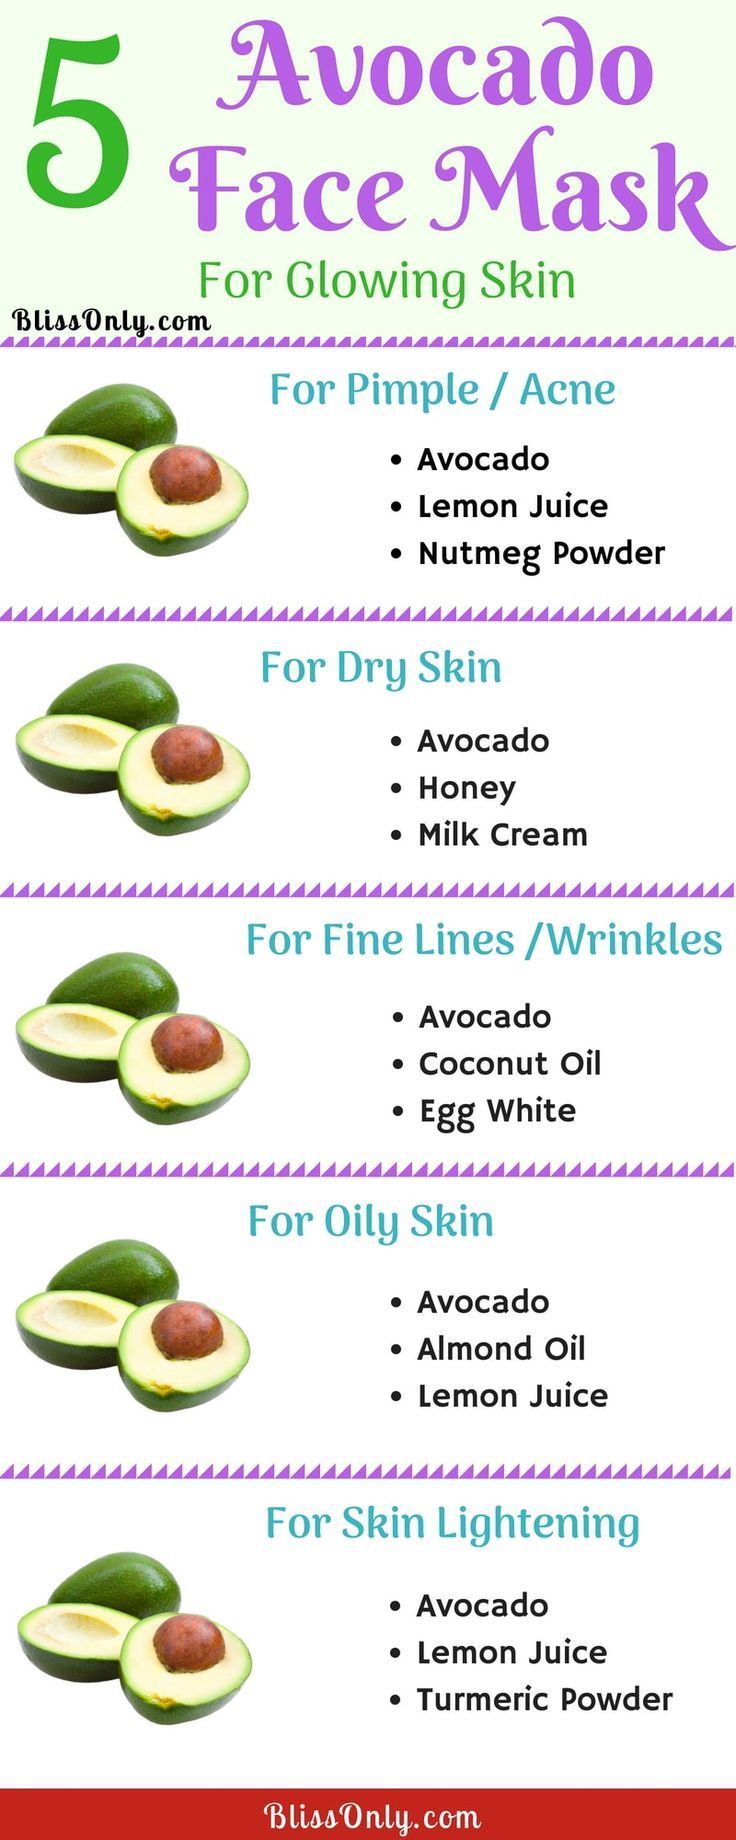 5 Avocado Face Mask For Glowing Skin - BlissOnly -   18 beauty Mask ideas